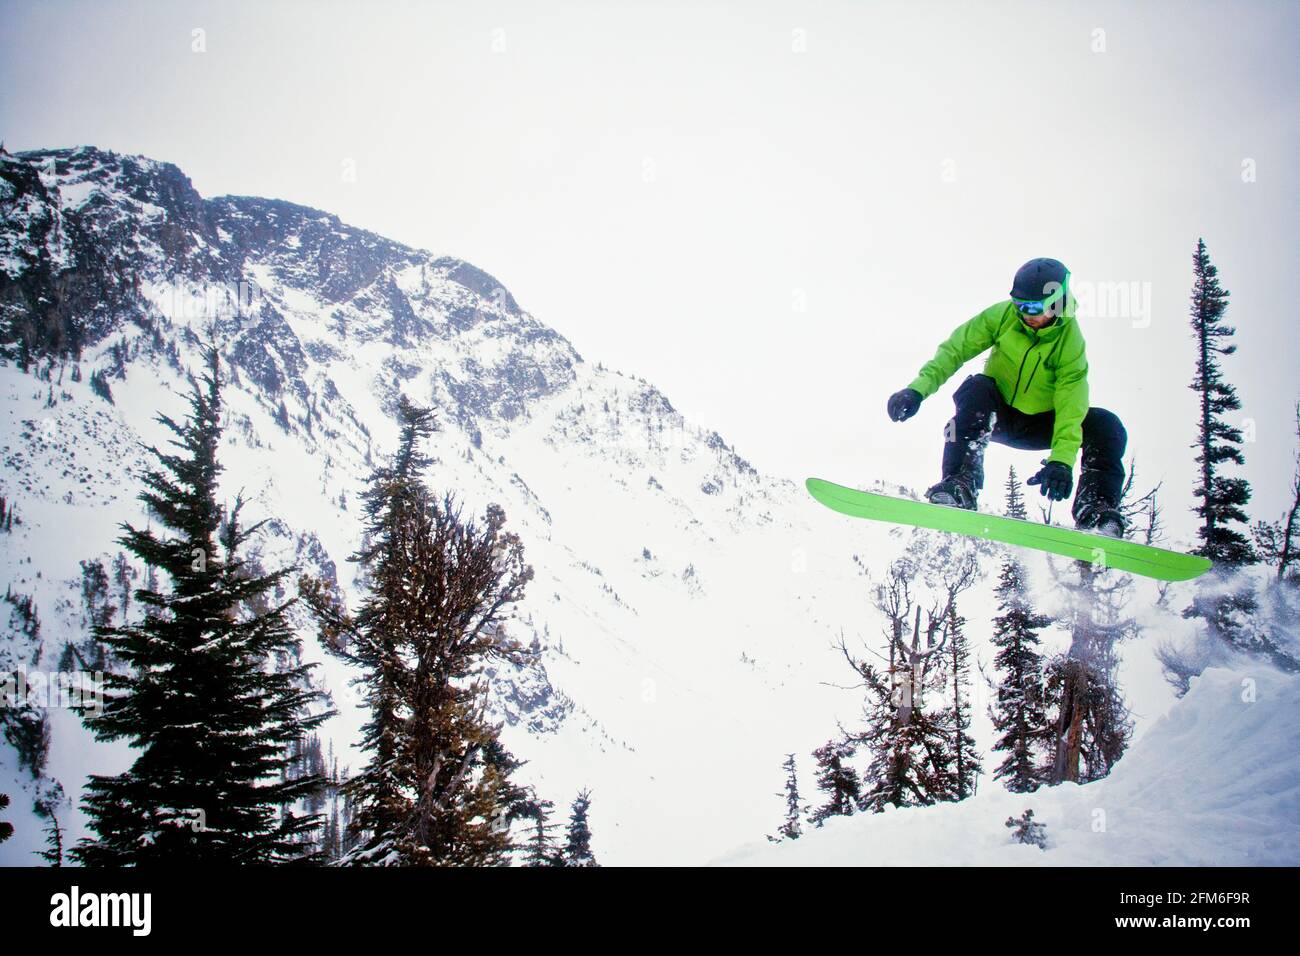 Snowboarder wearing green in mid-air after launching off snow jump. Stock Photo